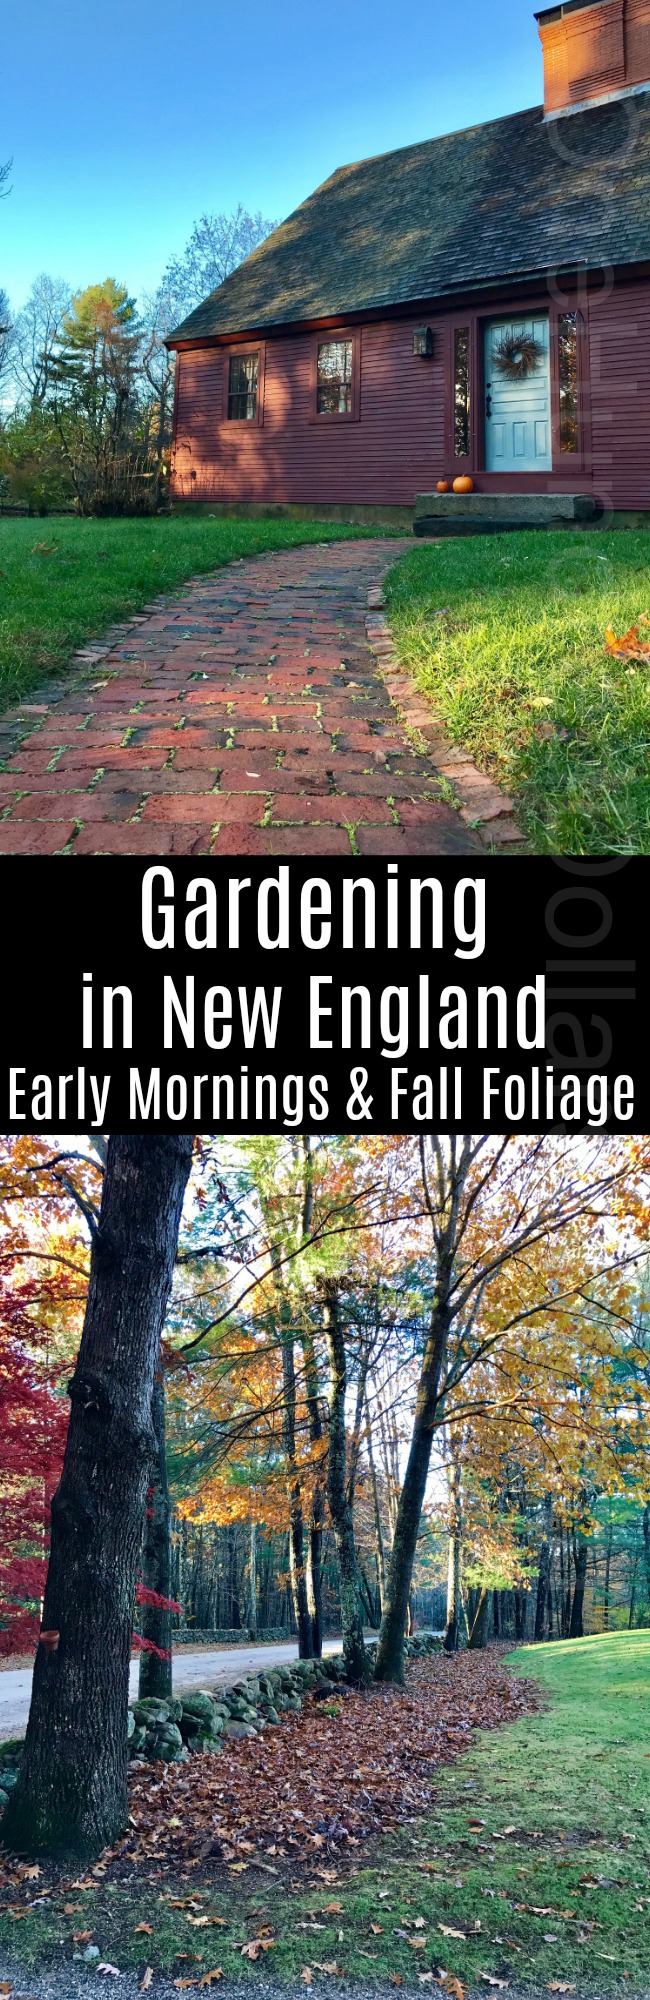 Gardening in New England – Early Mornings and Fall Foliage